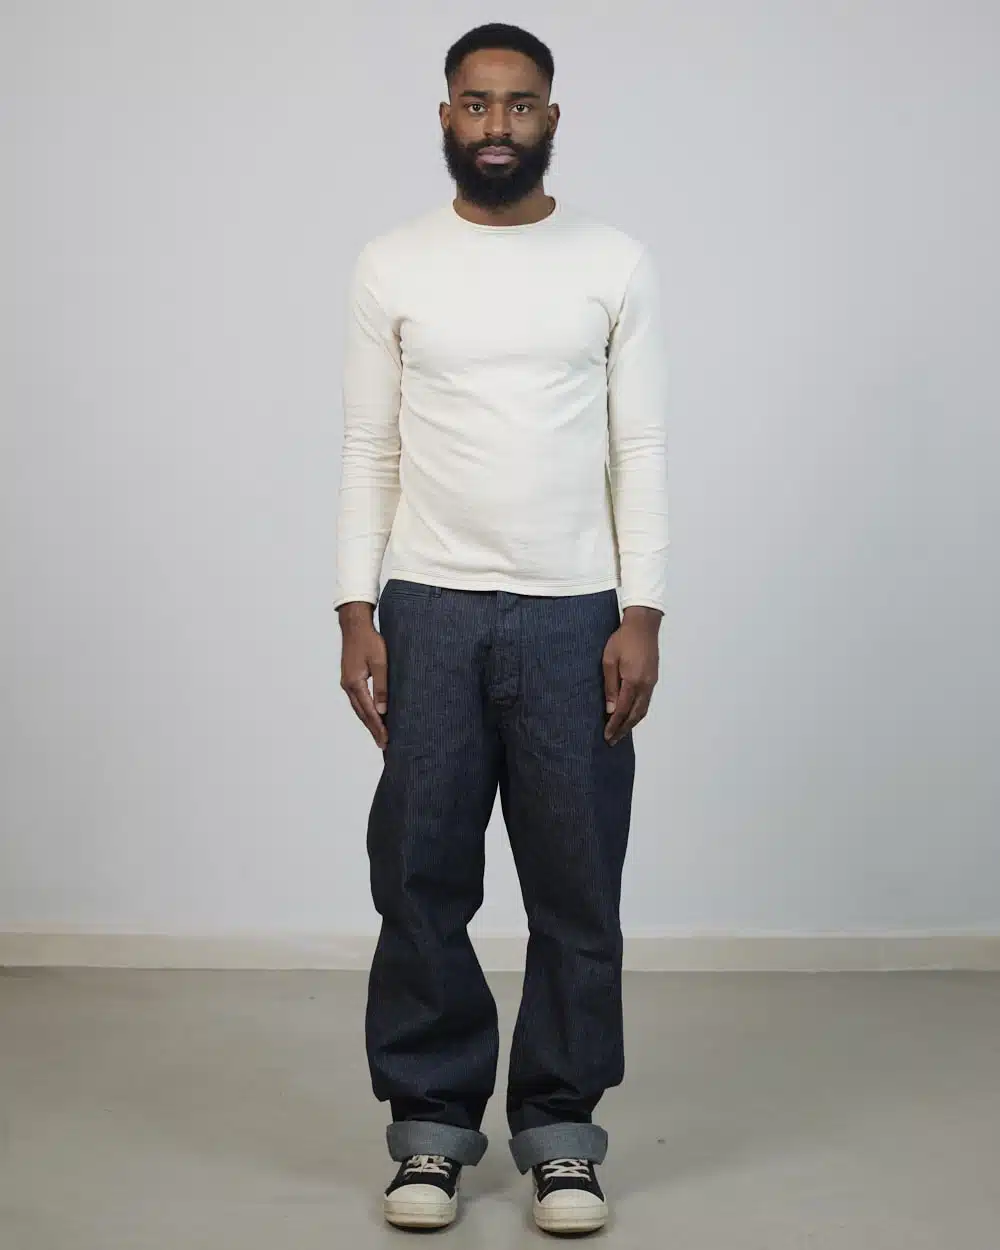 The Rite Stuff Pacemaker Pants - Indigo · Those That Know